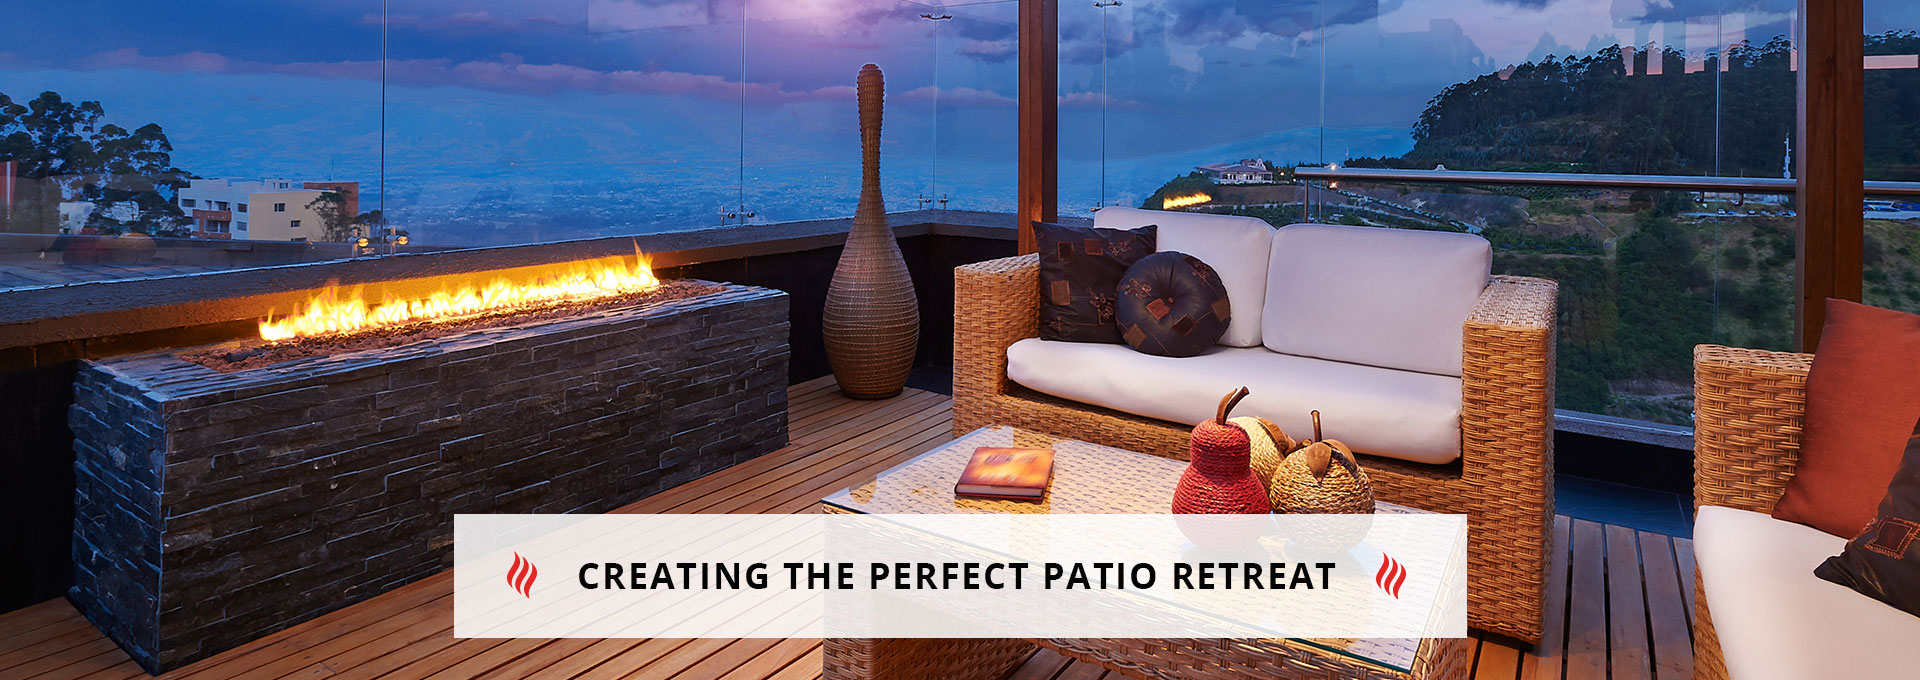 Creating the Perfect Patio Retreat 